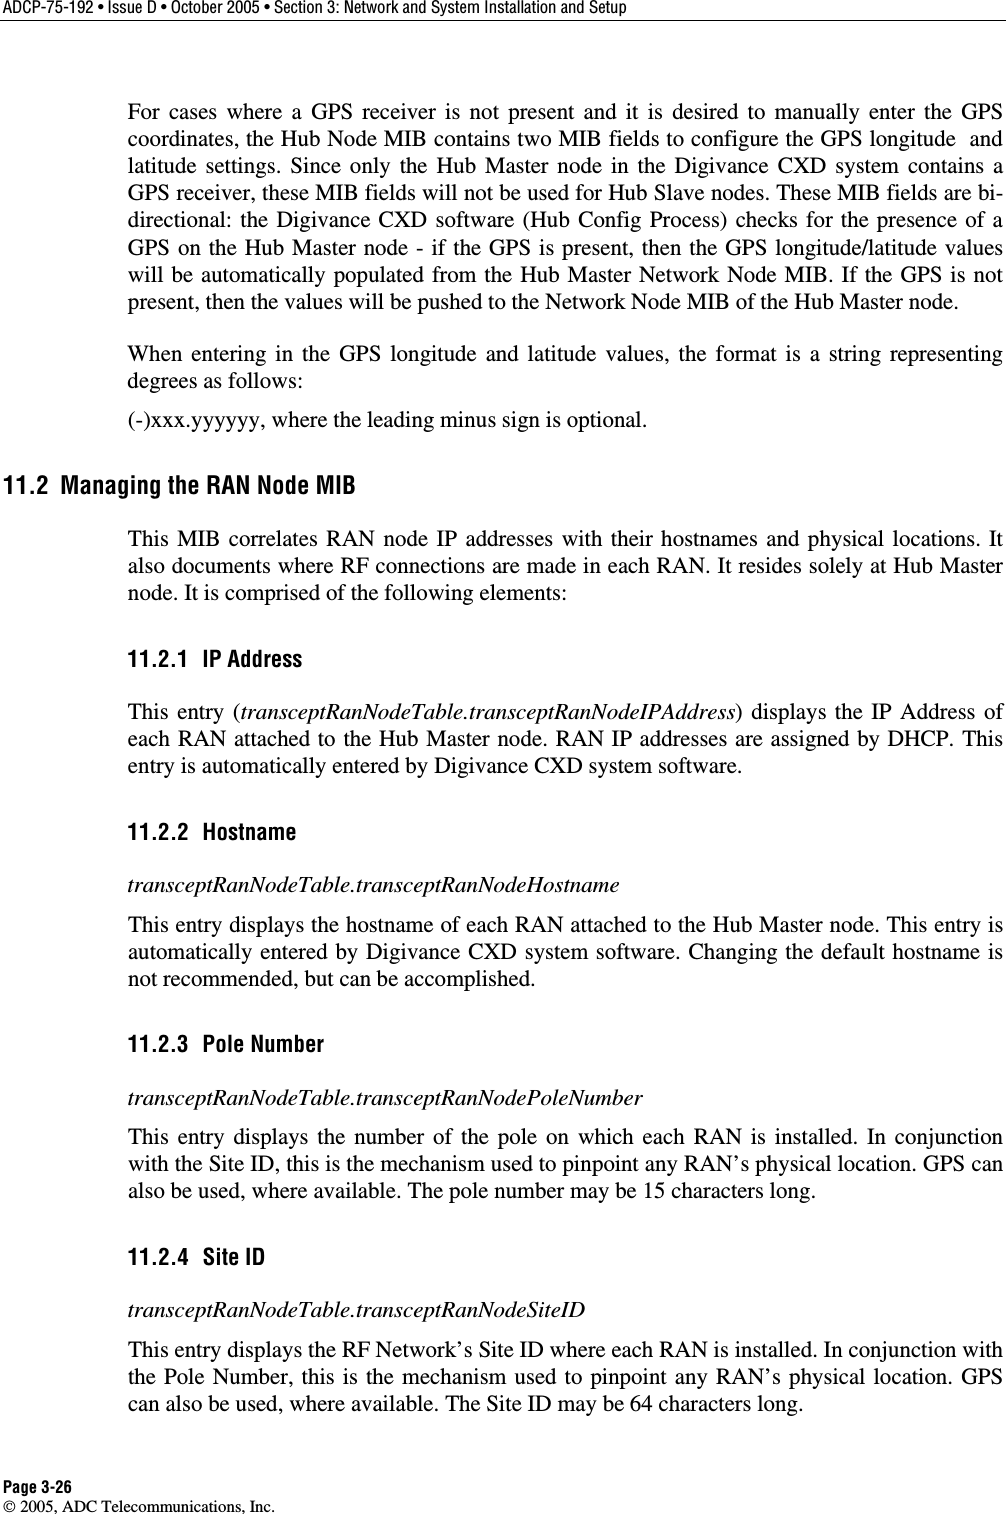 ADCP-75-192 • Issue D • October 2005 • Section 3: Network and System Installation and Setup Page 3-26  2005, ADC Telecommunications, Inc. For cases where a GPS receiver is not present and it is desired to manually enter the GPS coordinates, the Hub Node MIB contains two MIB fields to configure the GPS longitude  and latitude settings. Since only the Hub Master node in the Digivance CXD system contains a GPS receiver, these MIB fields will not be used for Hub Slave nodes. These MIB fields are bi-directional: the Digivance CXD software (Hub Config Process) checks for the presence of a GPS on the Hub Master node - if the GPS is present, then the GPS longitude/latitude values will be automatically populated from the Hub Master Network Node MIB. If the GPS is not present, then the values will be pushed to the Network Node MIB of the Hub Master node.  When entering in the GPS longitude and latitude values, the format is a string representing degrees as follows:  (-)xxx.yyyyyy, where the leading minus sign is optional. 11.2  Managing the RAN Node MIB This MIB correlates RAN node IP addresses with their hostnames and physical locations. It also documents where RF connections are made in each RAN. It resides solely at Hub Master node. It is comprised of the following elements: 11.2.1 IP Address This entry (transceptRanNodeTable.transceptRanNodeIPAddress) displays the IP Address of each RAN attached to the Hub Master node. RAN IP addresses are assigned by DHCP. This entry is automatically entered by Digivance CXD system software. 11.2.2 Hostname transceptRanNodeTable.transceptRanNodeHostname This entry displays the hostname of each RAN attached to the Hub Master node. This entry is automatically entered by Digivance CXD system software. Changing the default hostname is not recommended, but can be accomplished. 11.2.3 Pole Number transceptRanNodeTable.transceptRanNodePoleNumber This entry displays the number of the pole on which each RAN is installed. In conjunction with the Site ID, this is the mechanism used to pinpoint any RAN’s physical location. GPS can also be used, where available. The pole number may be 15 characters long. 11.2.4 Site ID transceptRanNodeTable.transceptRanNodeSiteID This entry displays the RF Network’s Site ID where each RAN is installed. In conjunction with the Pole Number, this is the mechanism used to pinpoint any RAN’s physical location. GPS can also be used, where available. The Site ID may be 64 characters long. 